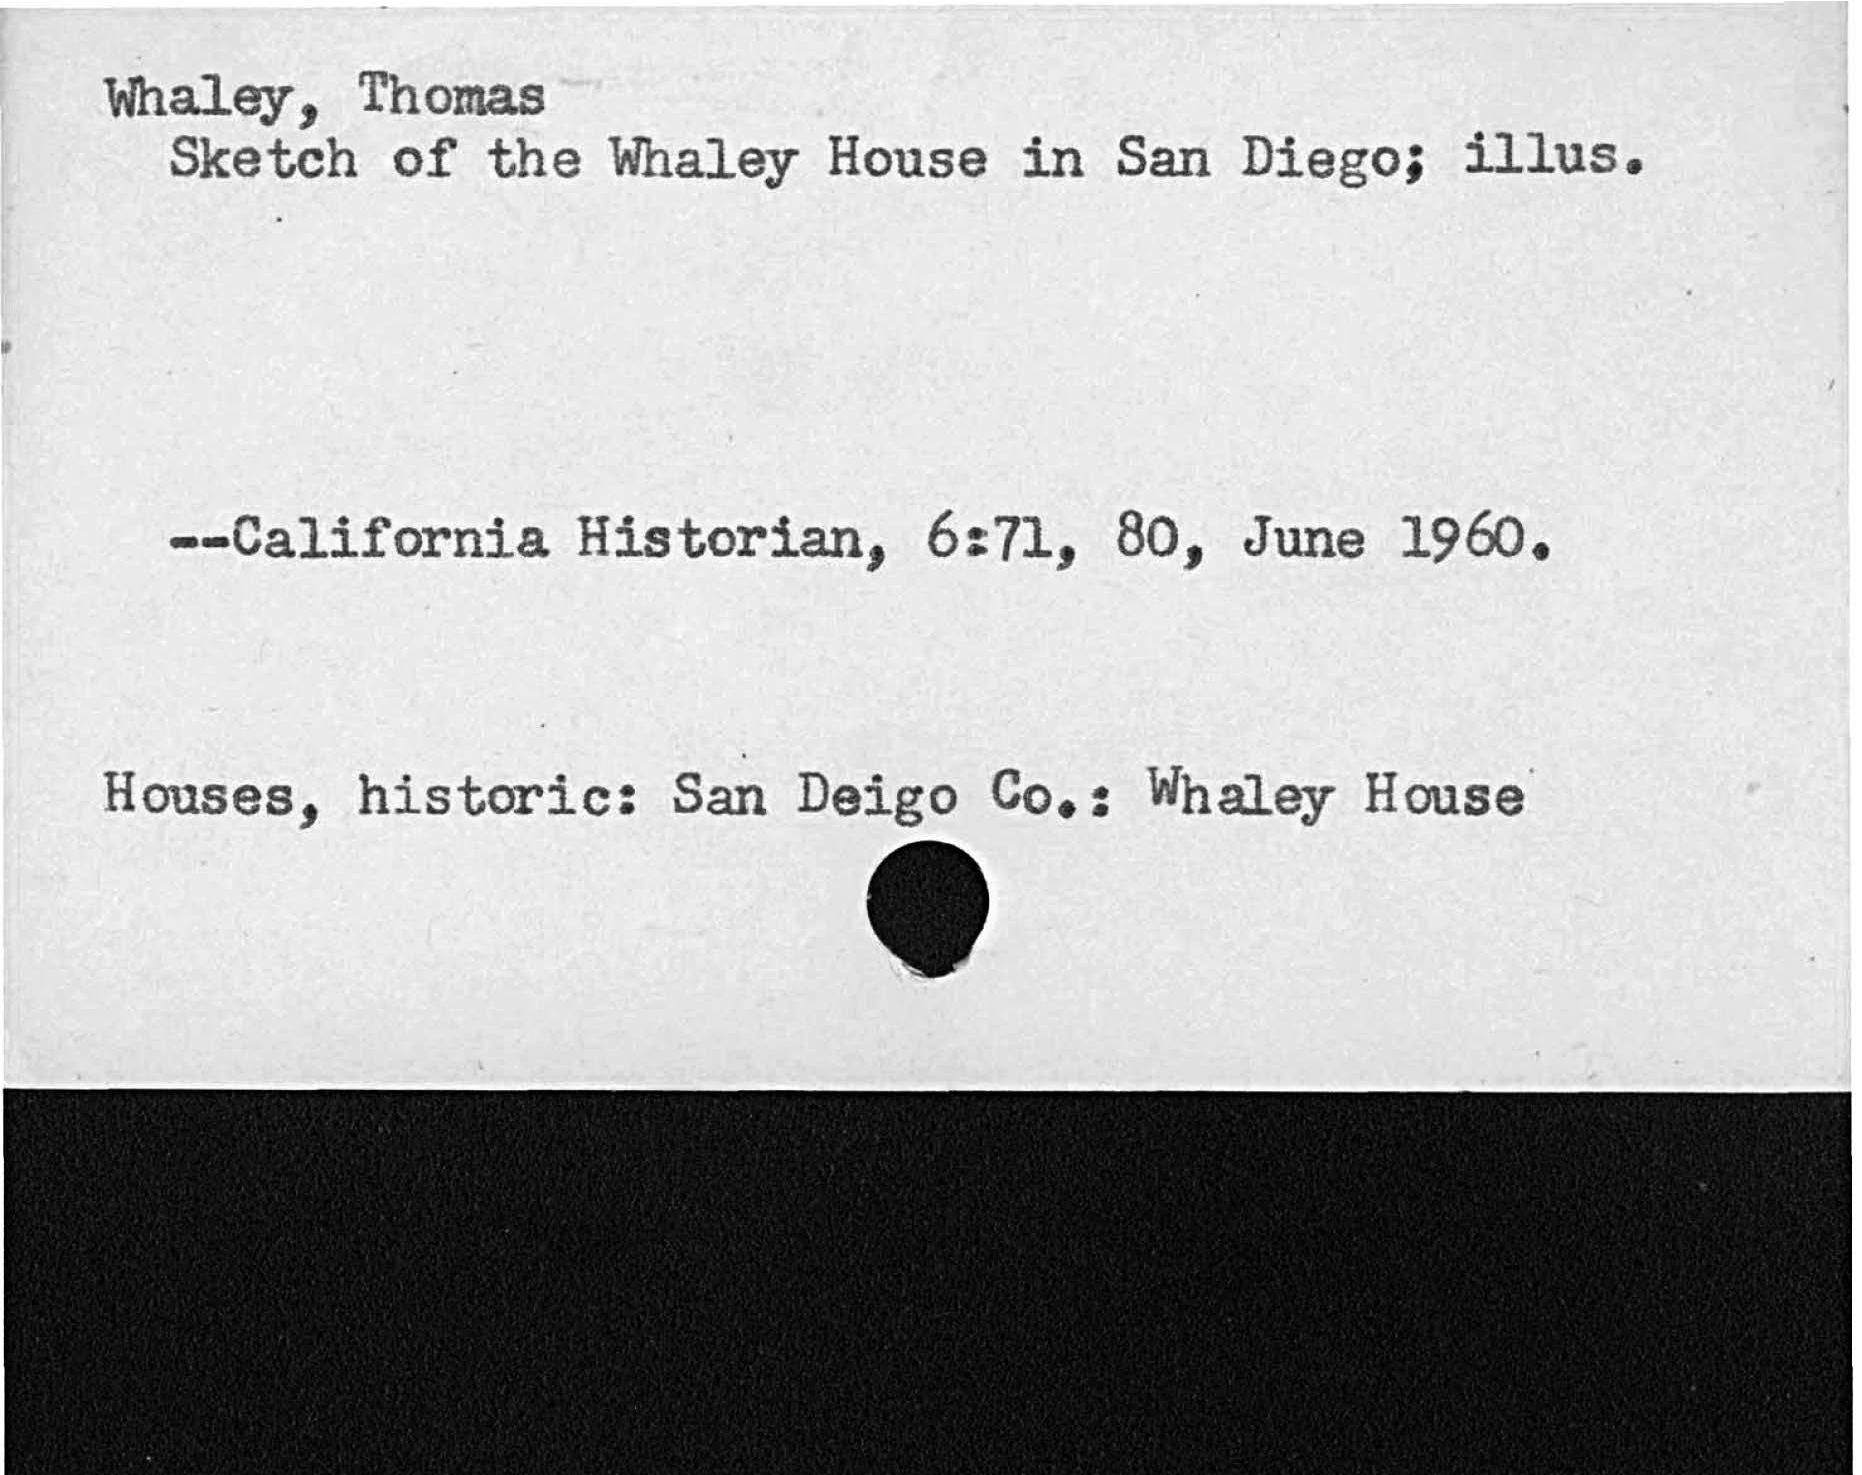 Whaley, ThomasSketch of the Whaley House in San Diego; illus.California Historian, 6:  71, Bo, June 1960.Houses, historic:  San Diego Co. Whaley House